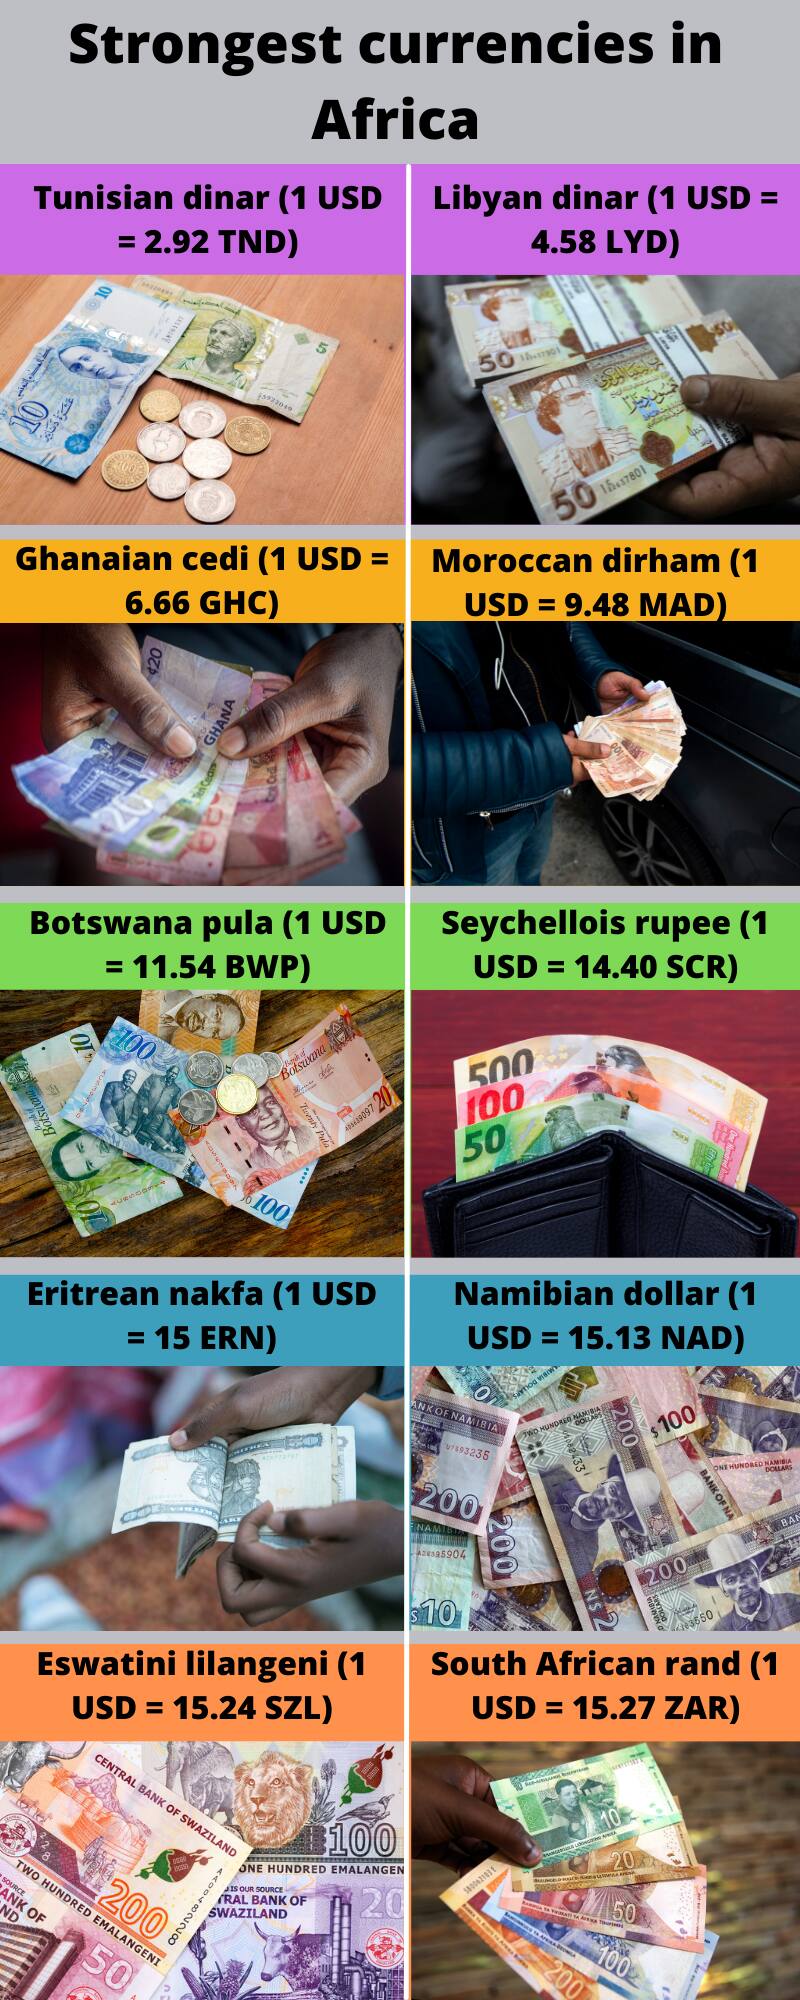 strongest currencies in Africa